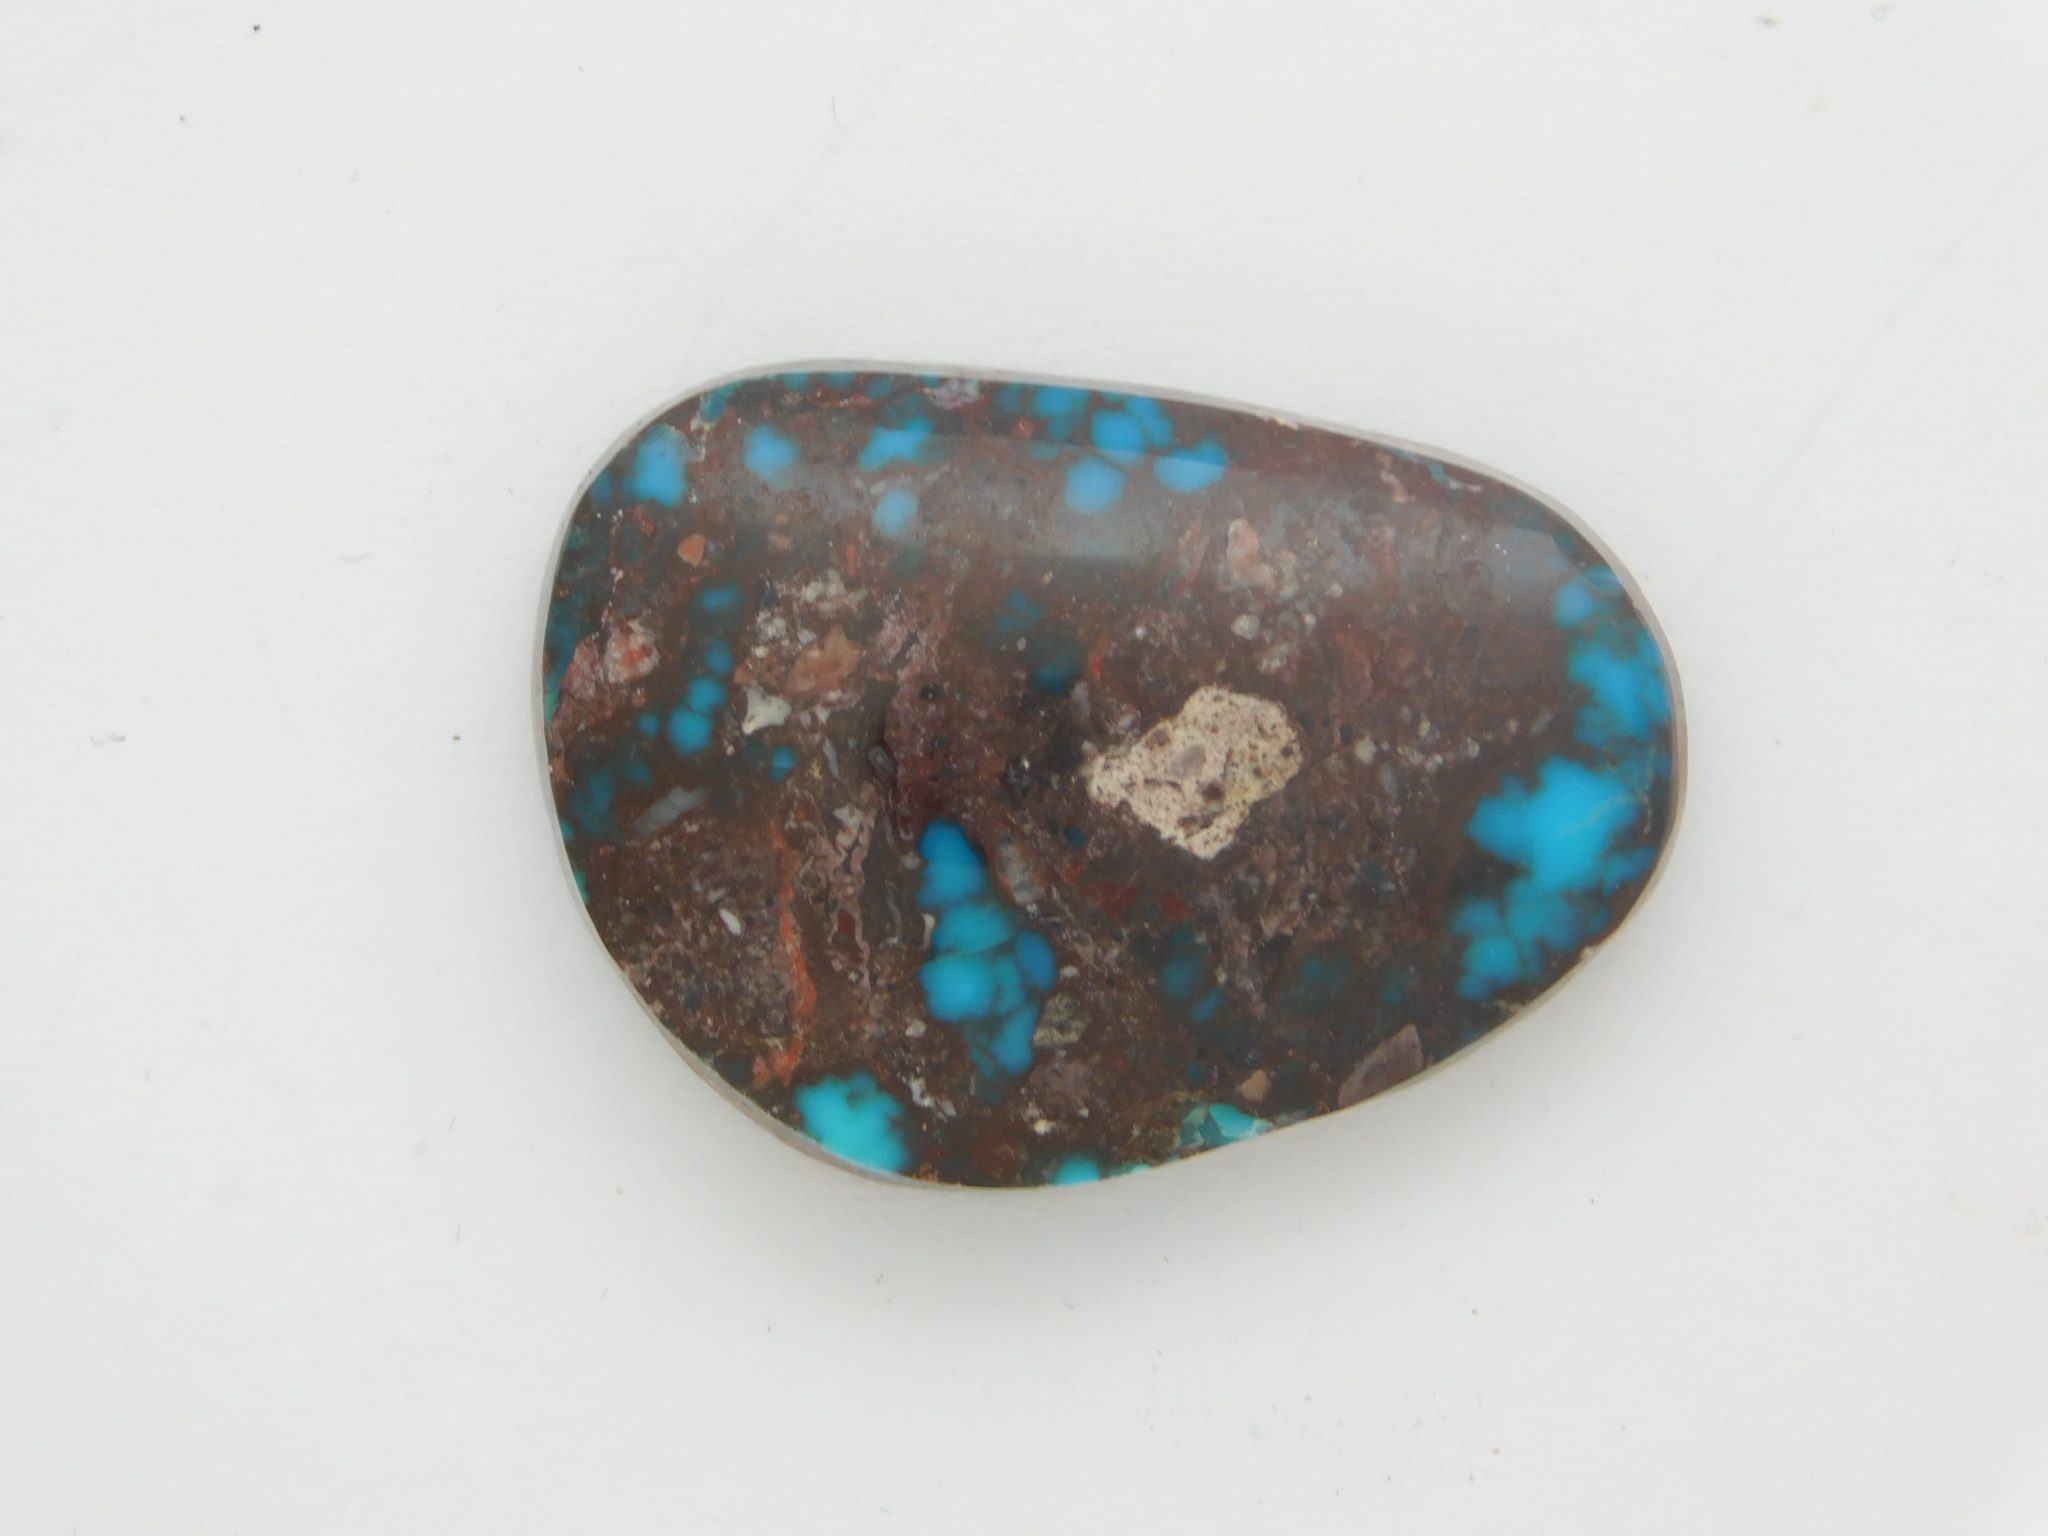 Bisbee Turquoise Cabochon 47 carats (9.4 grams)